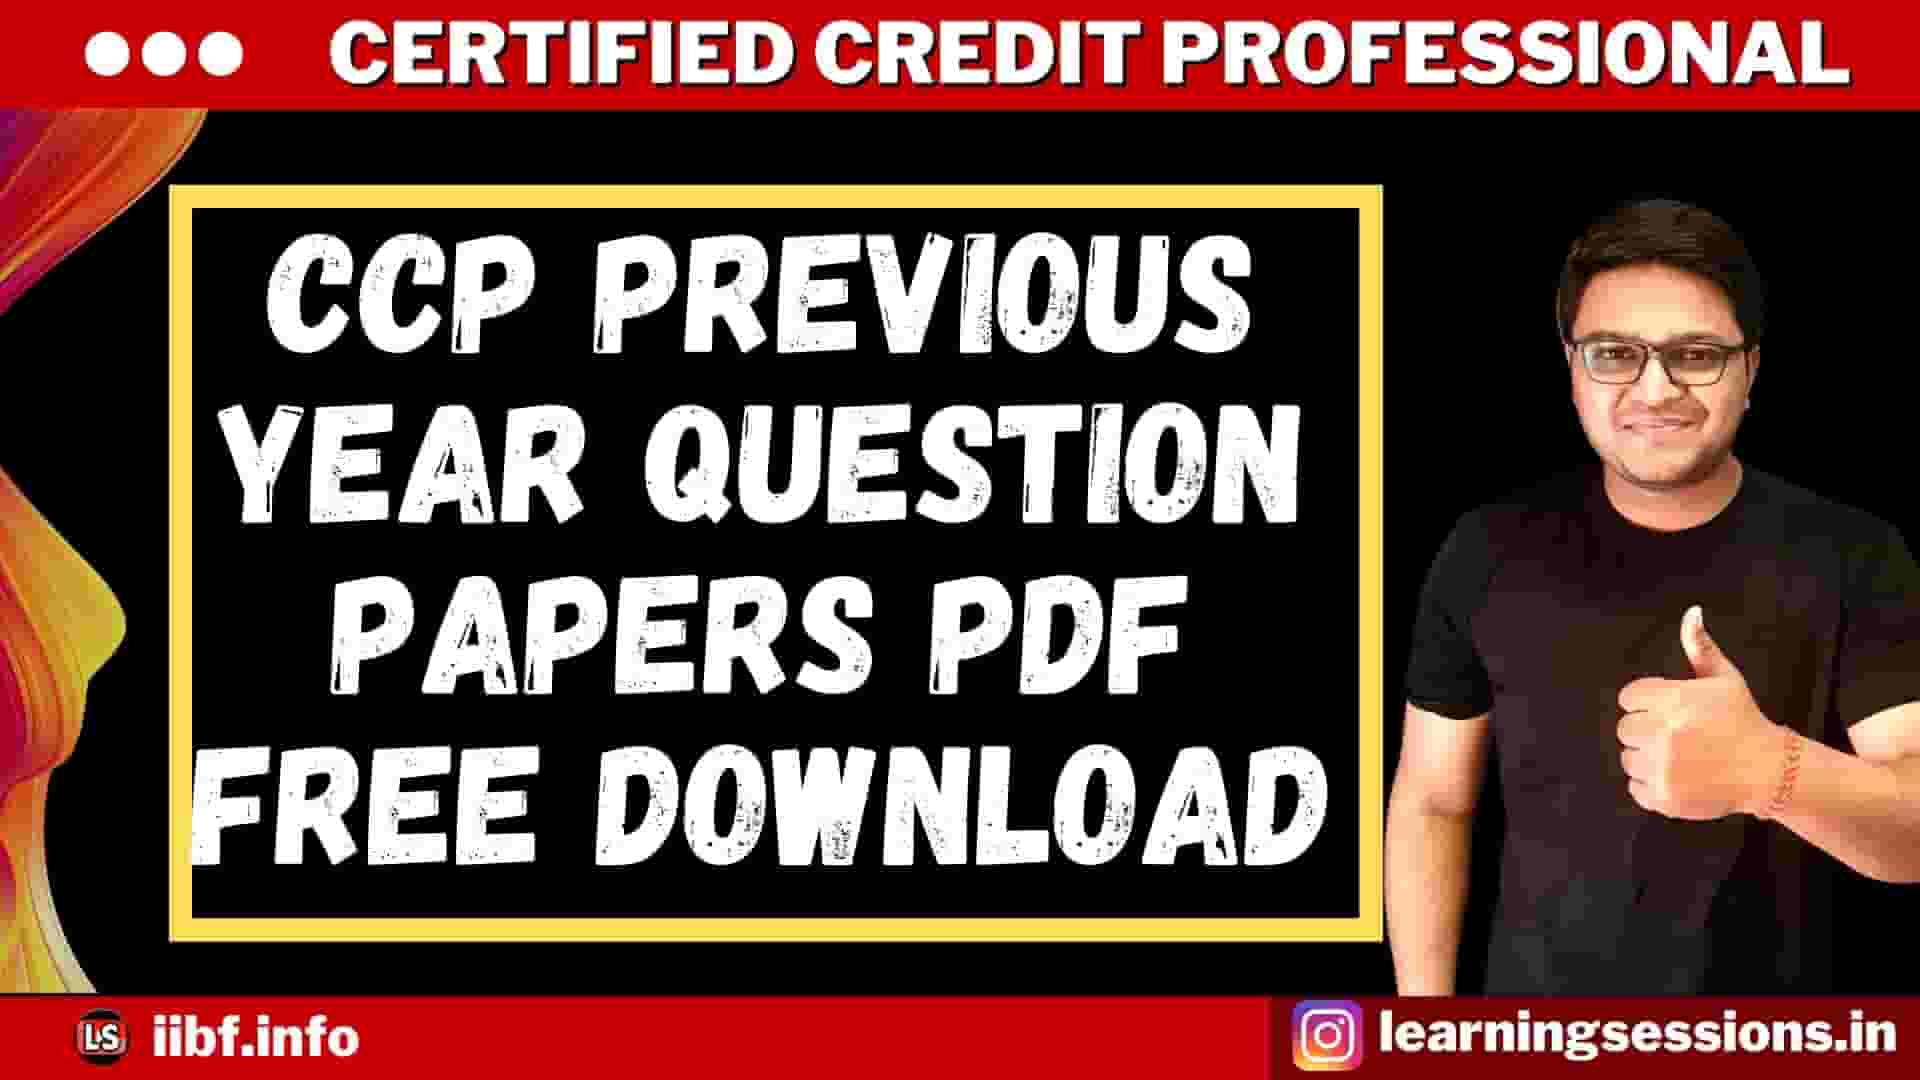 CCP Previous Year Question Papers PDF Free Download